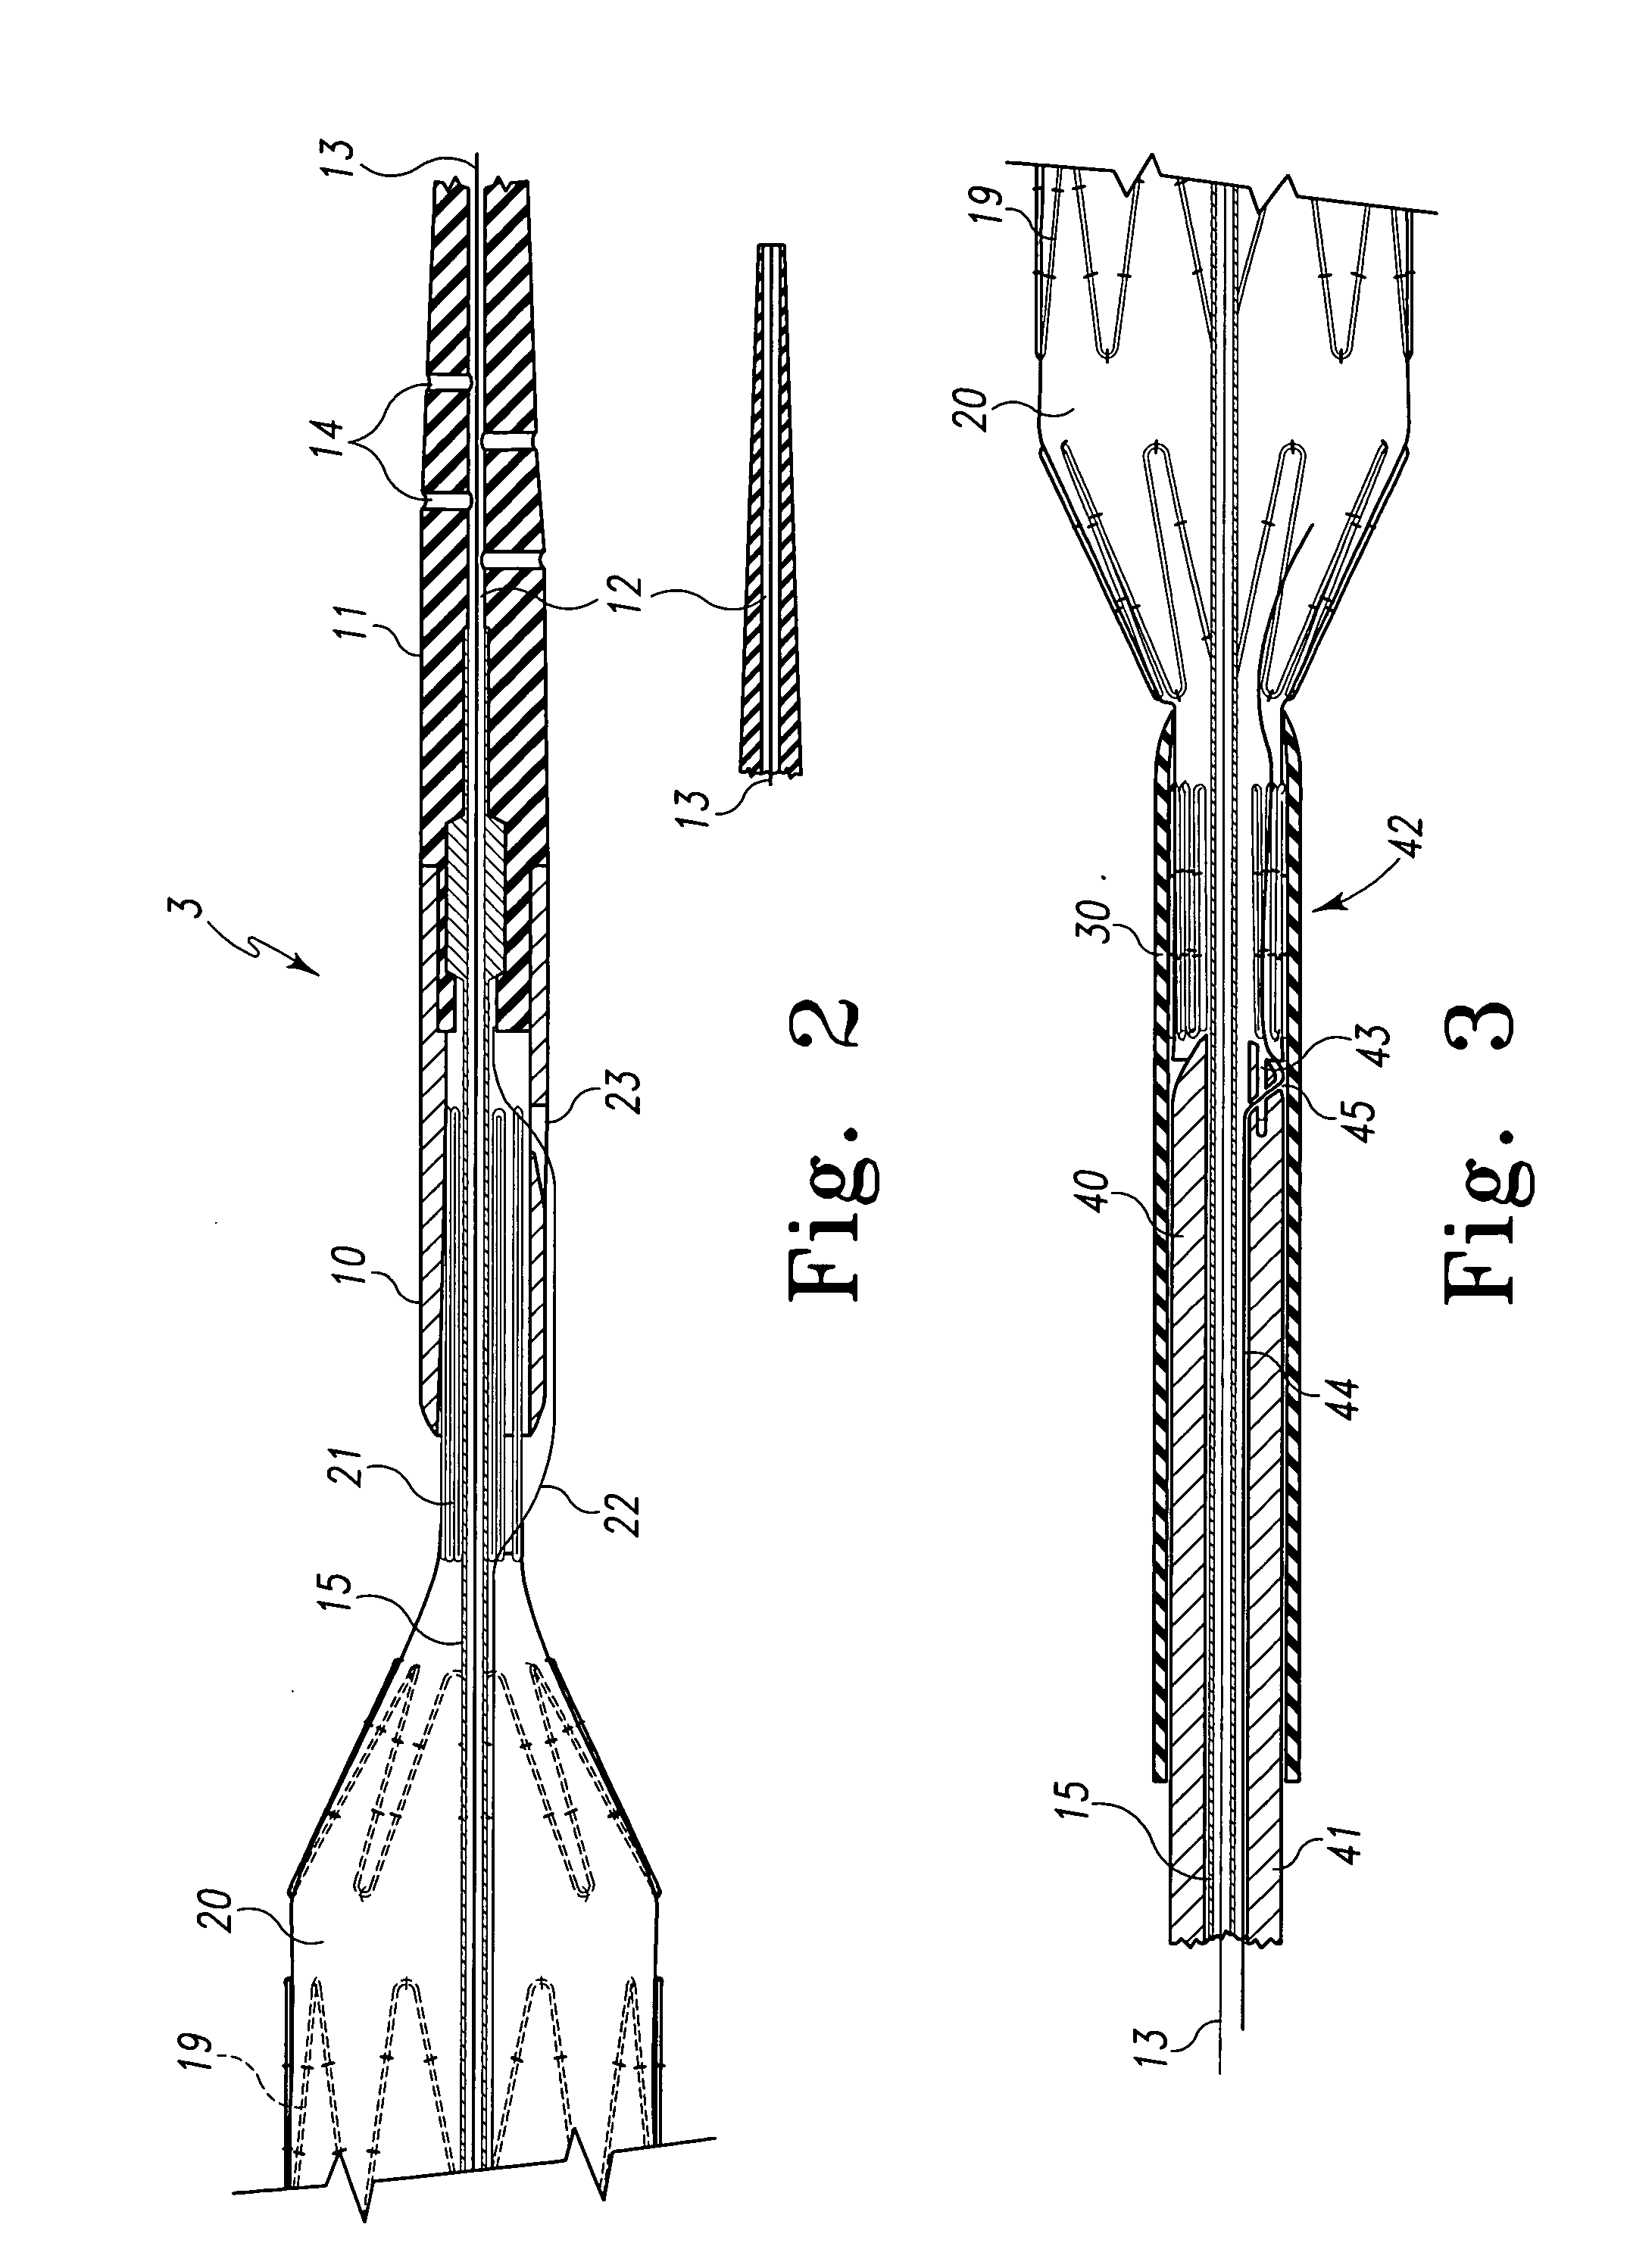 Fenestrated intraluminal stent system